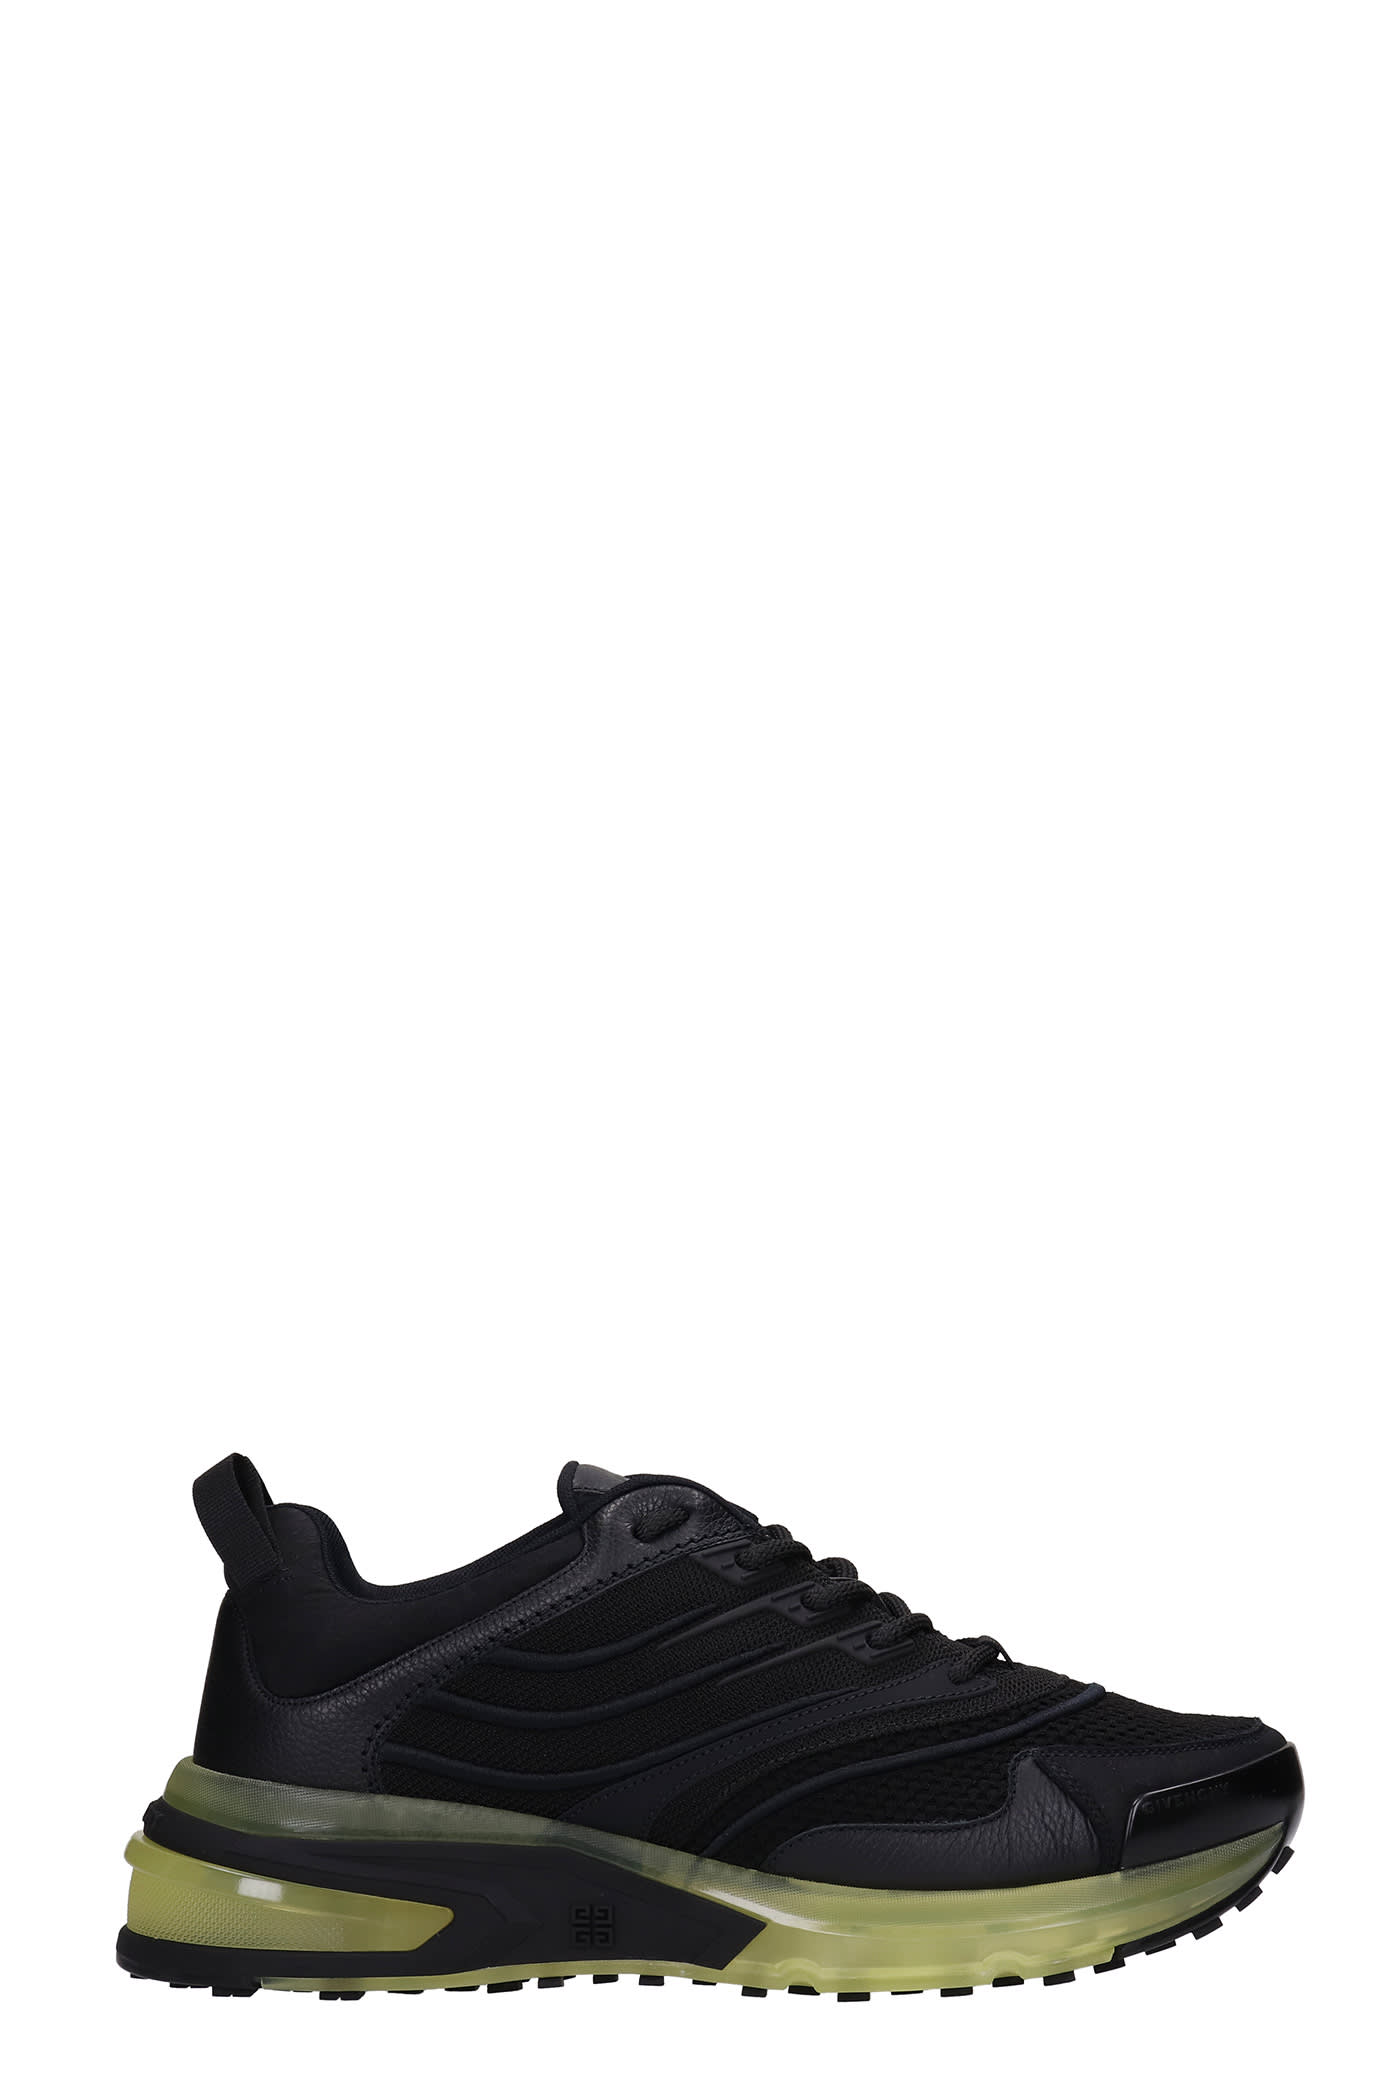 Givenchy Giv 1 Sneakers In Black Synthetic Fibers